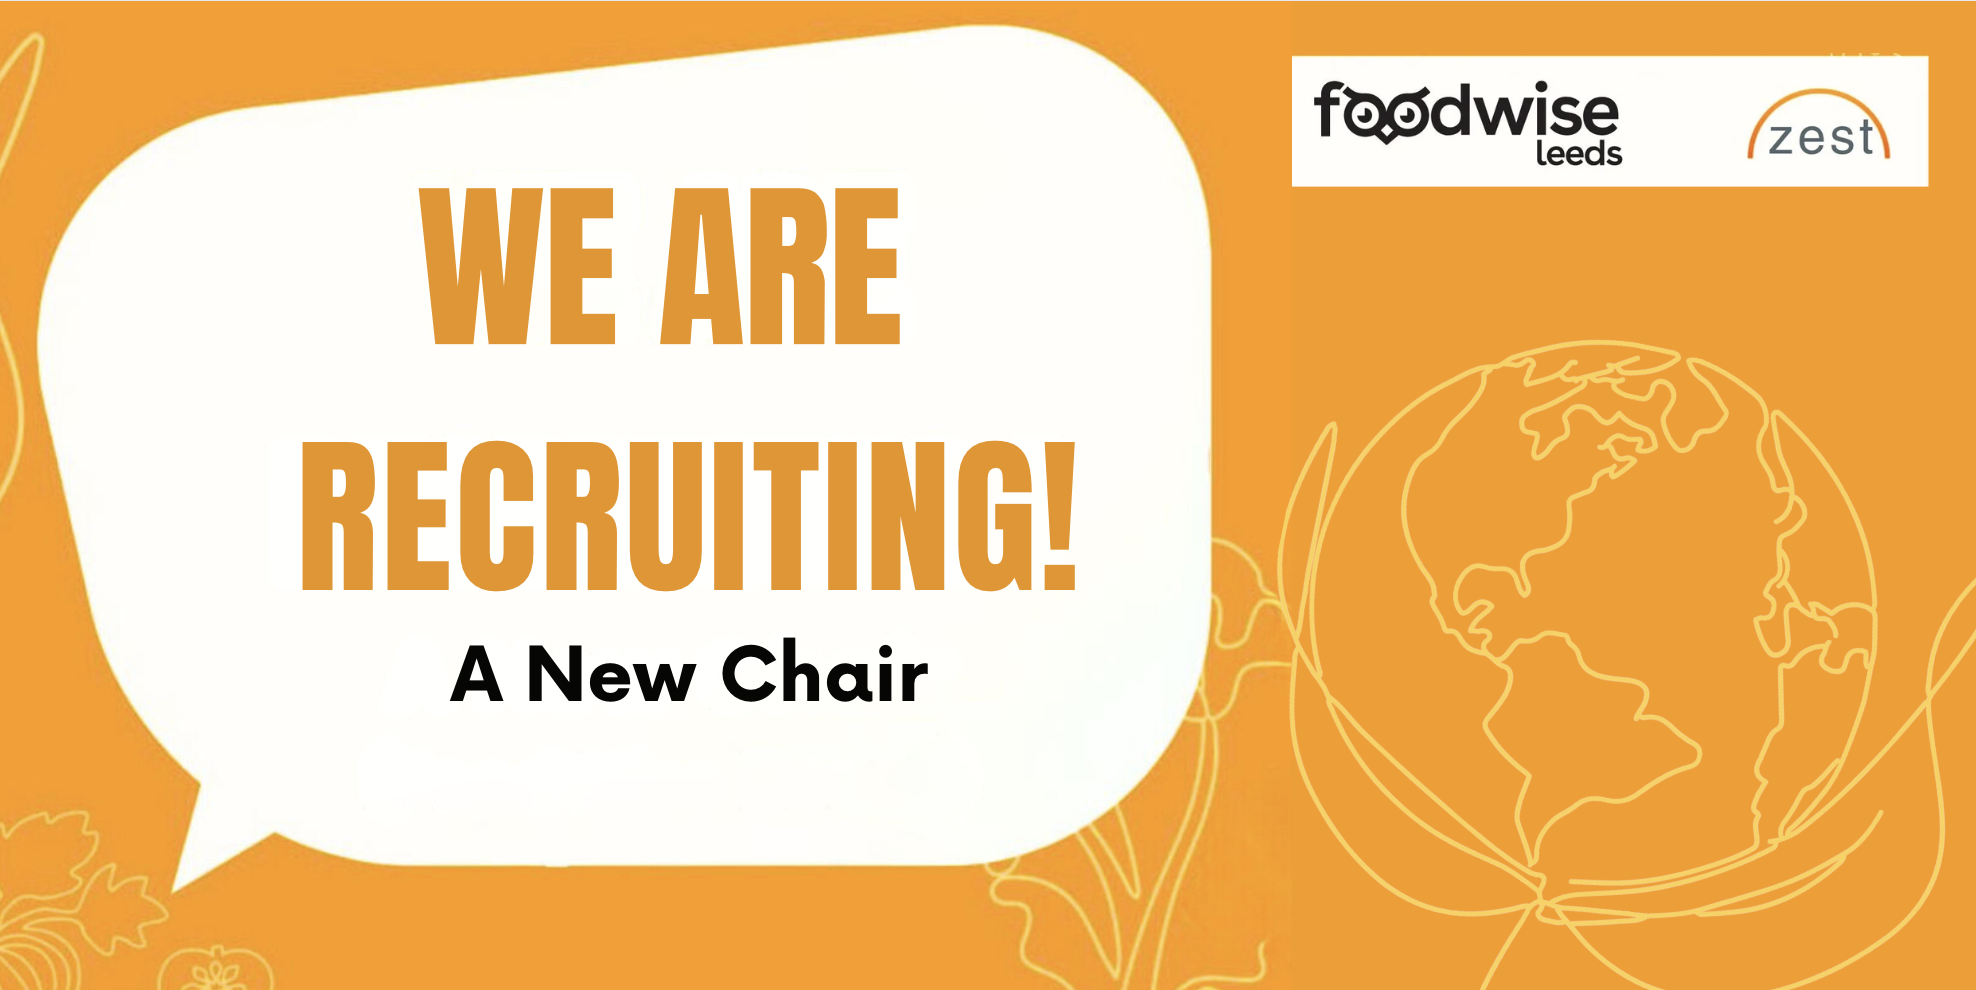 we are hiring a new chair
white lettering in orange background
